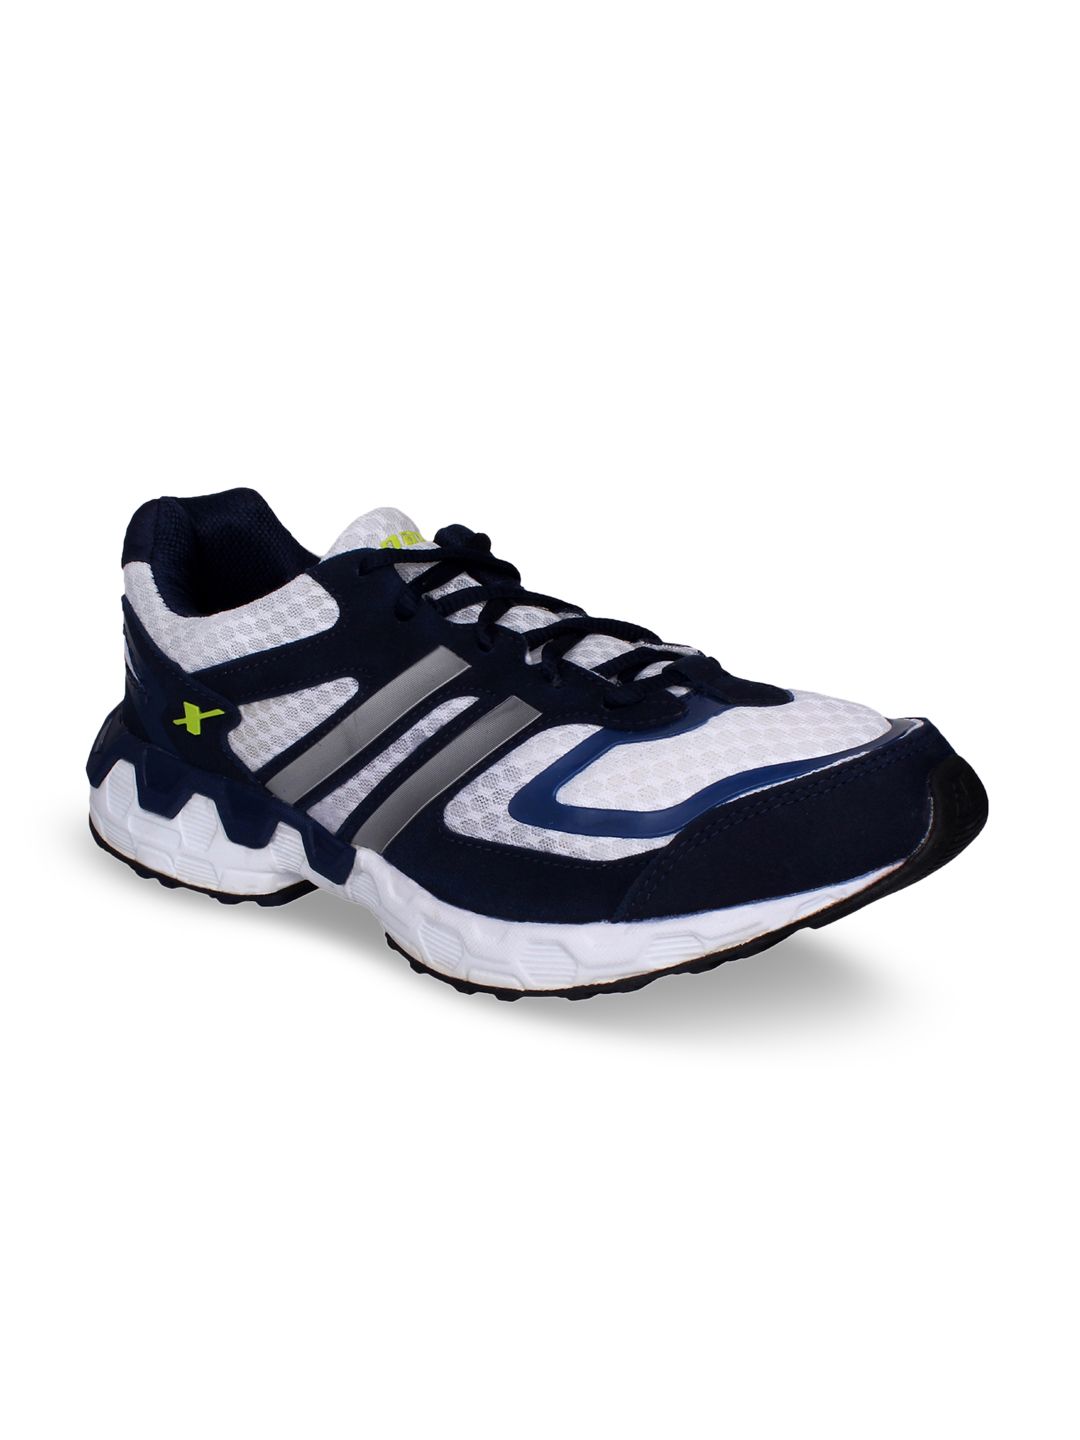 sparx men's navy blue and white running shoes